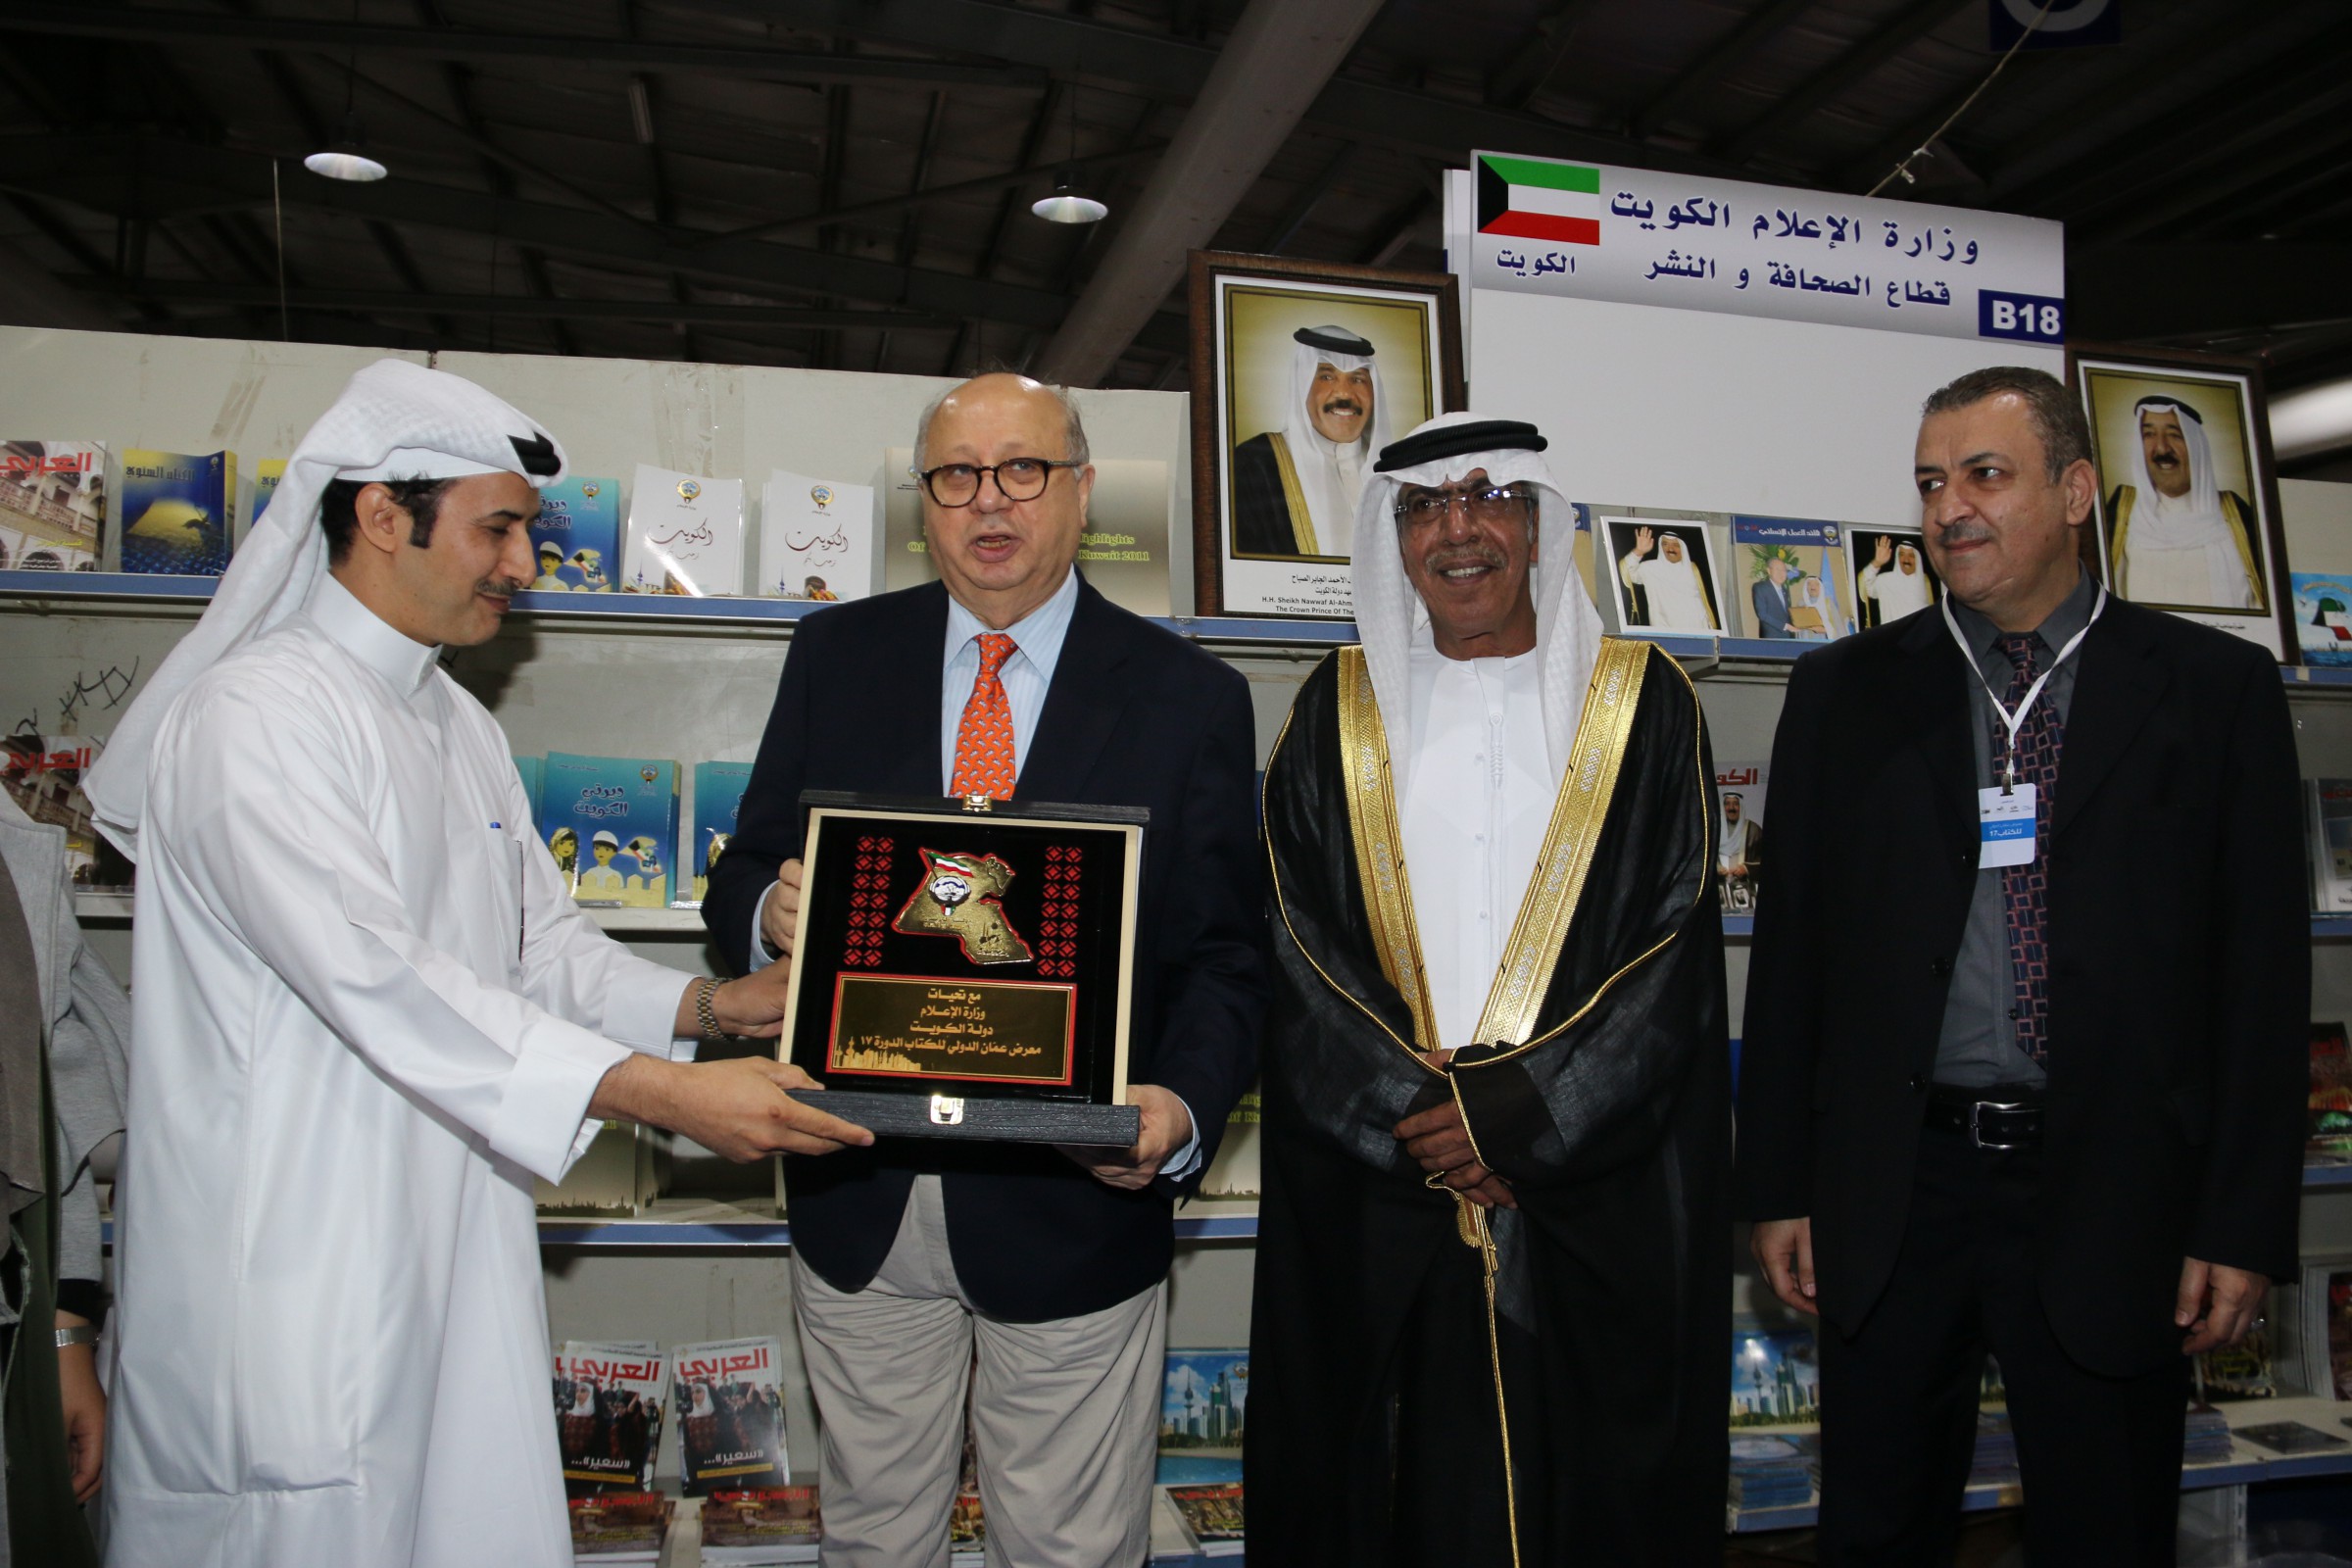 Representatives from Kuwait participating in the Amman International Book Expo